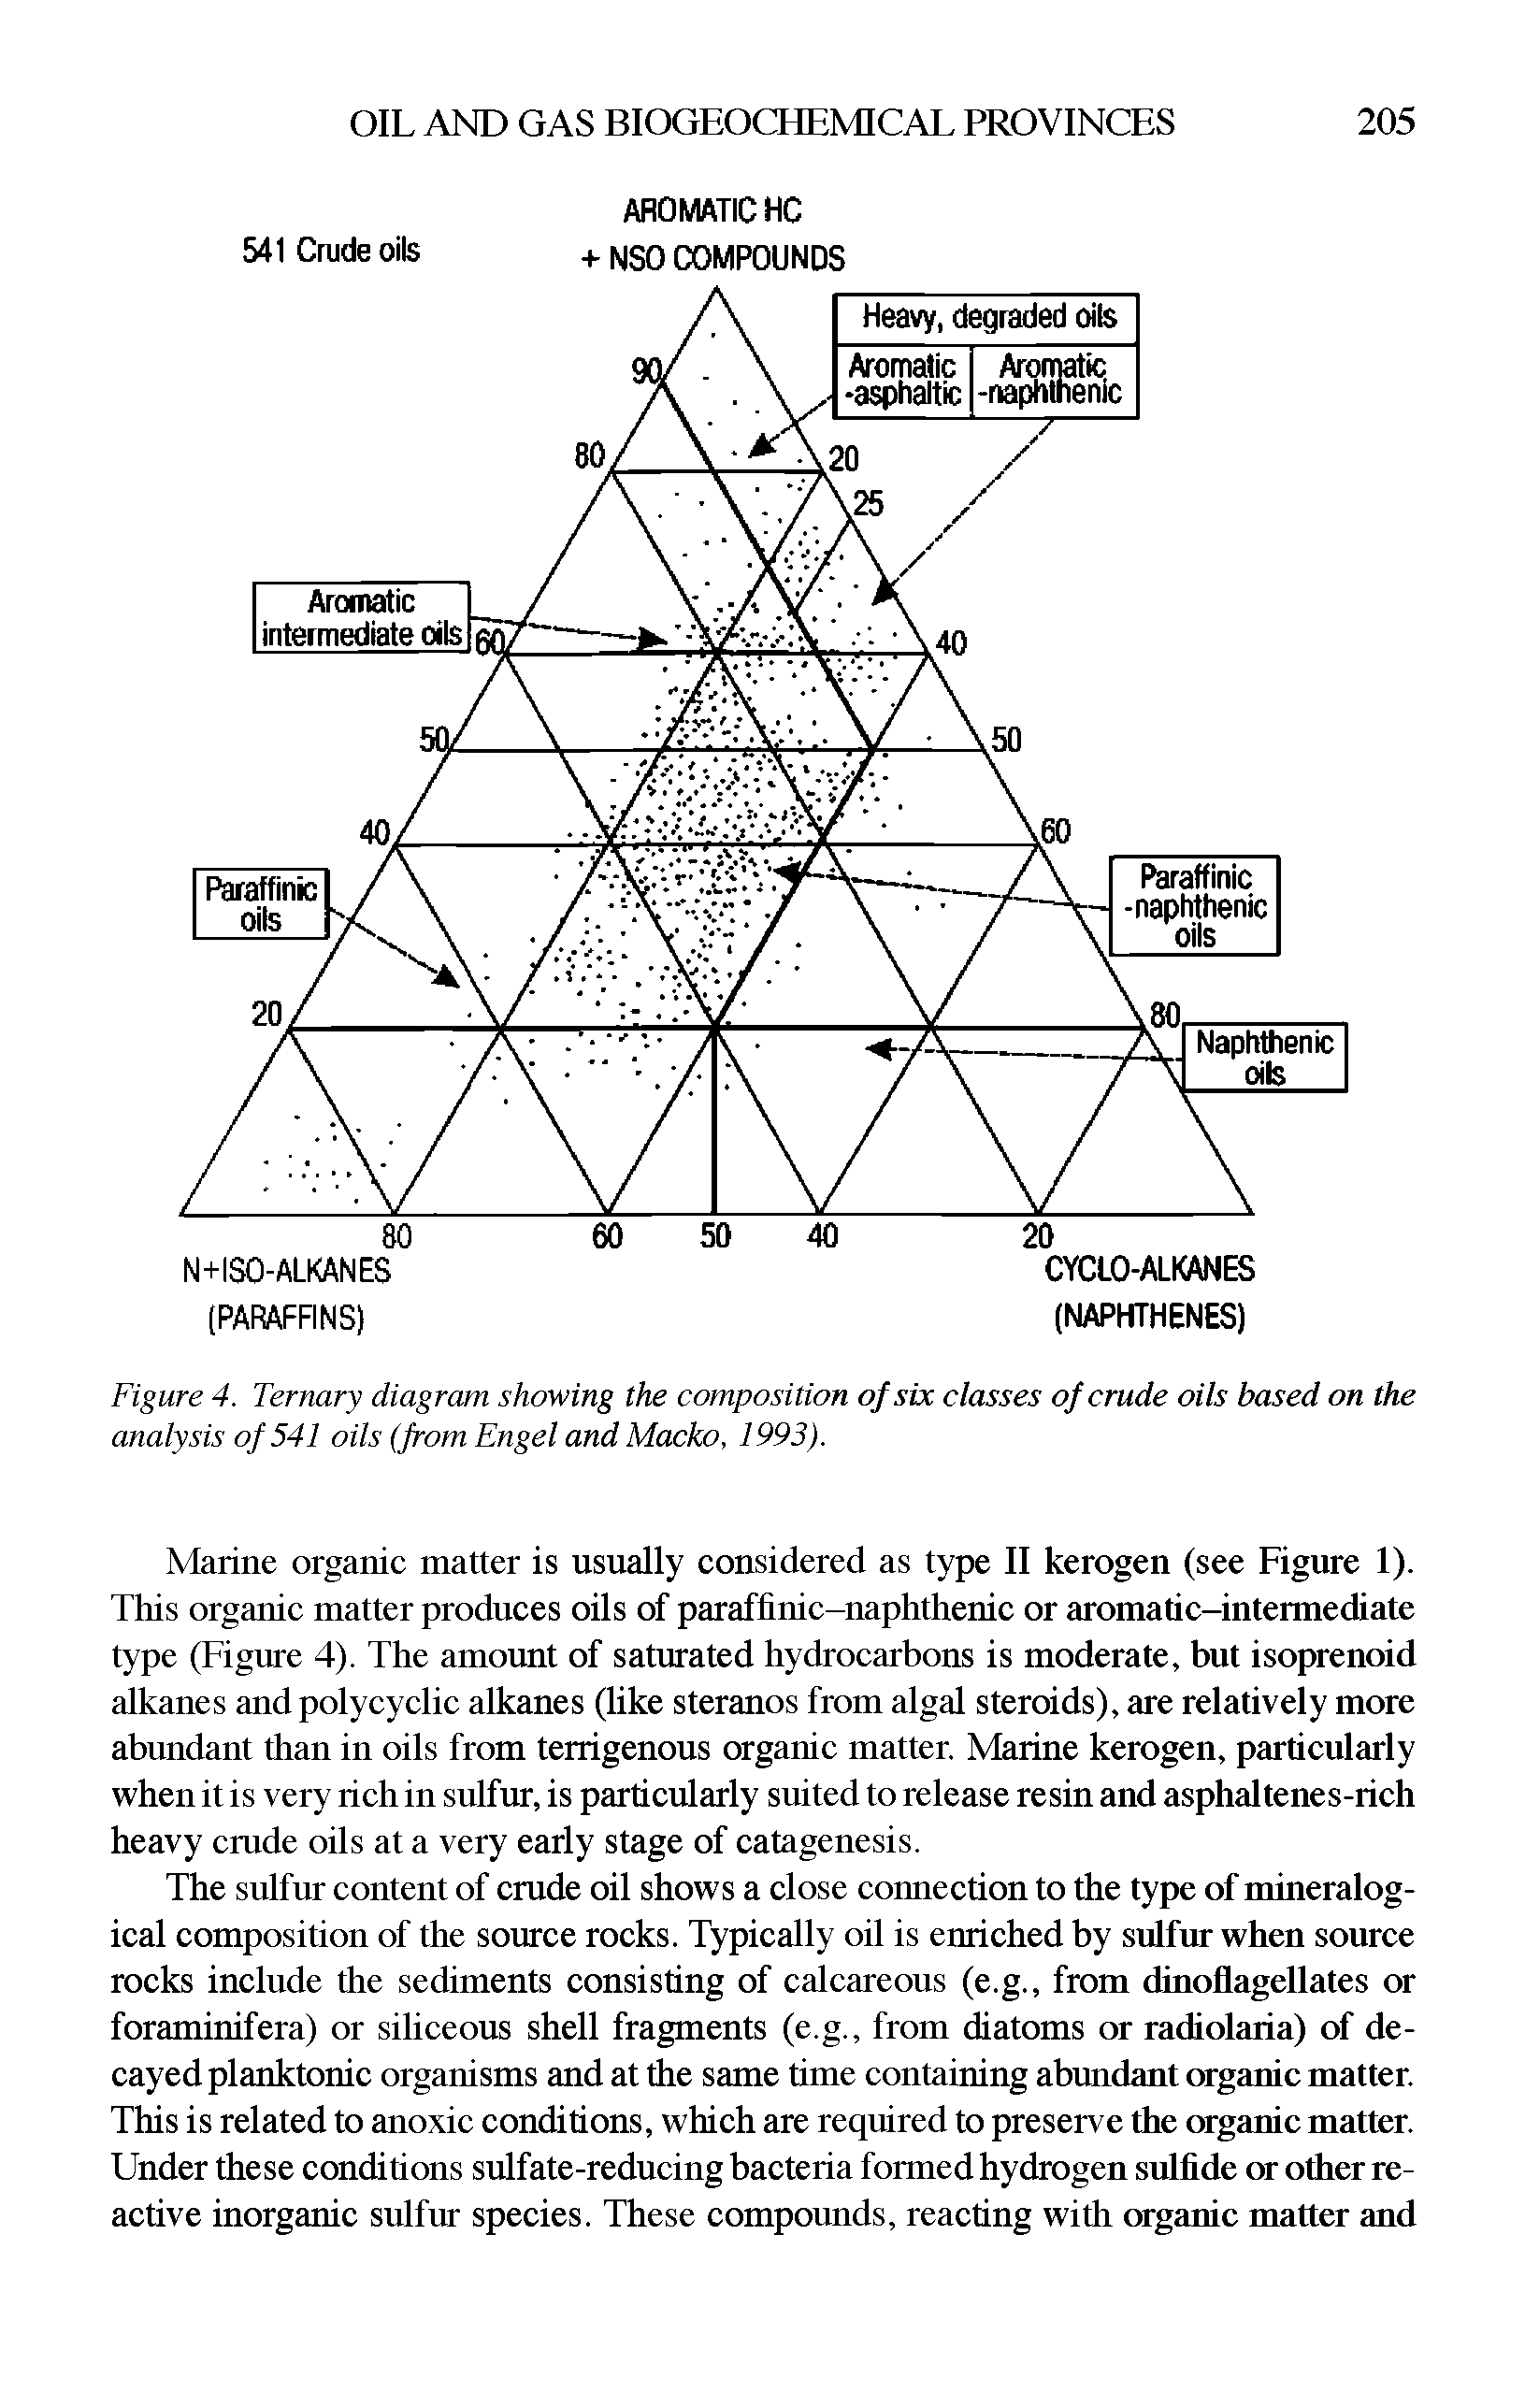 Figure 4. Ternary diagram showing the composition of six classes of crude oils based on the analysis of 541 oils (from Engel and Macho, 1993).